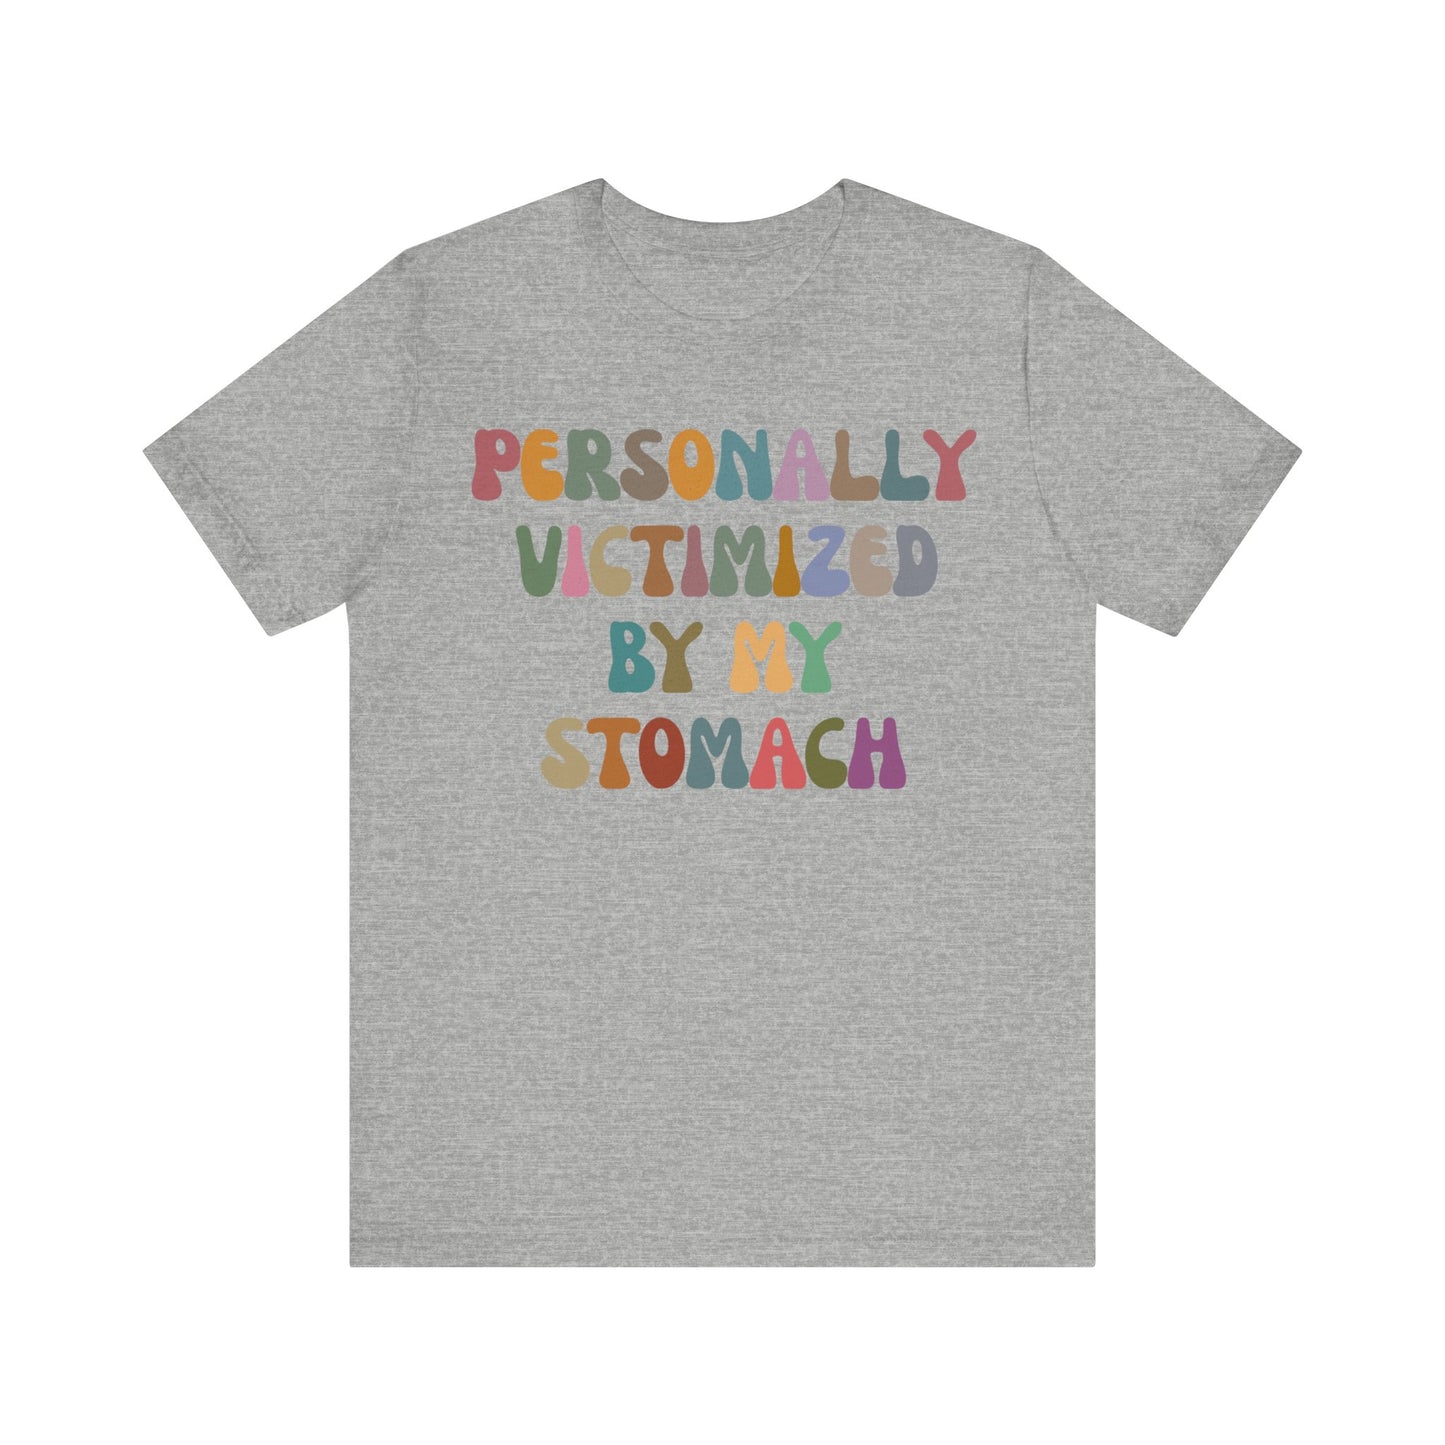 Personally Victimized By My Stomach Shirt, Funny Shirt for Women, Gift for Mom, Funny Tummy Hurts Shirt, Chronic Illness Shirt, T1101